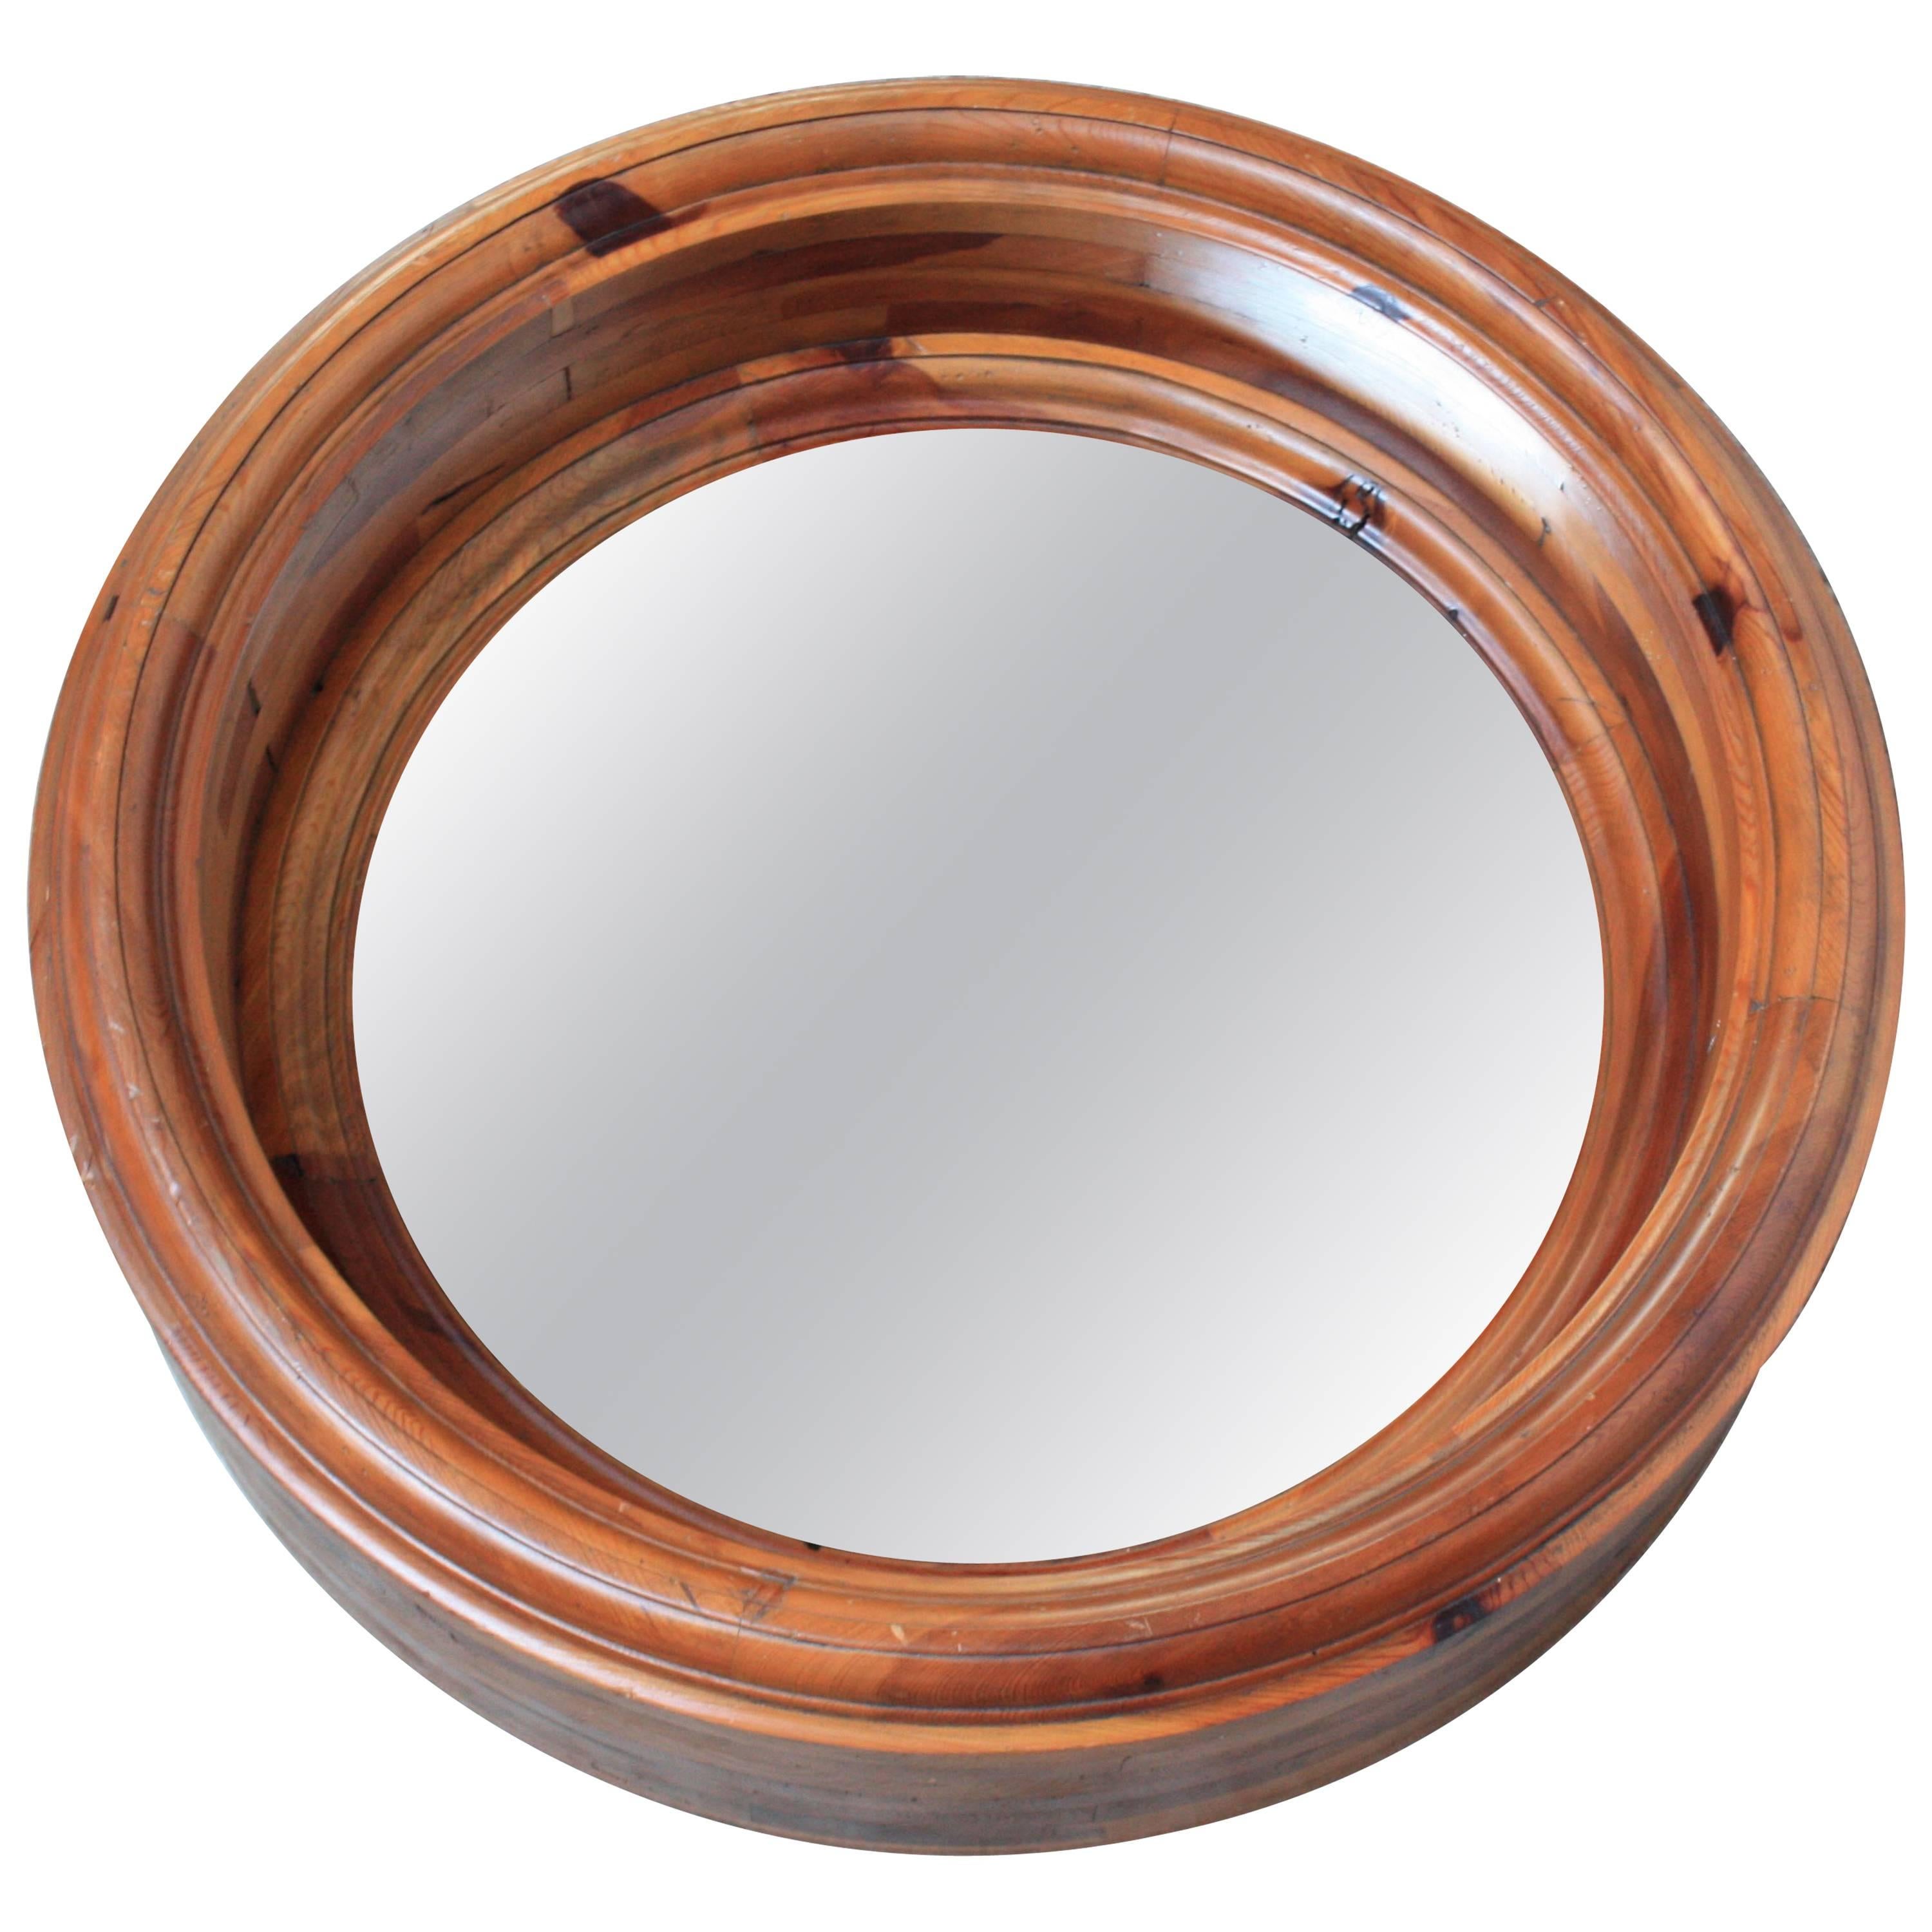 Large Wooden Porthole Mirror by Ralph Lauren